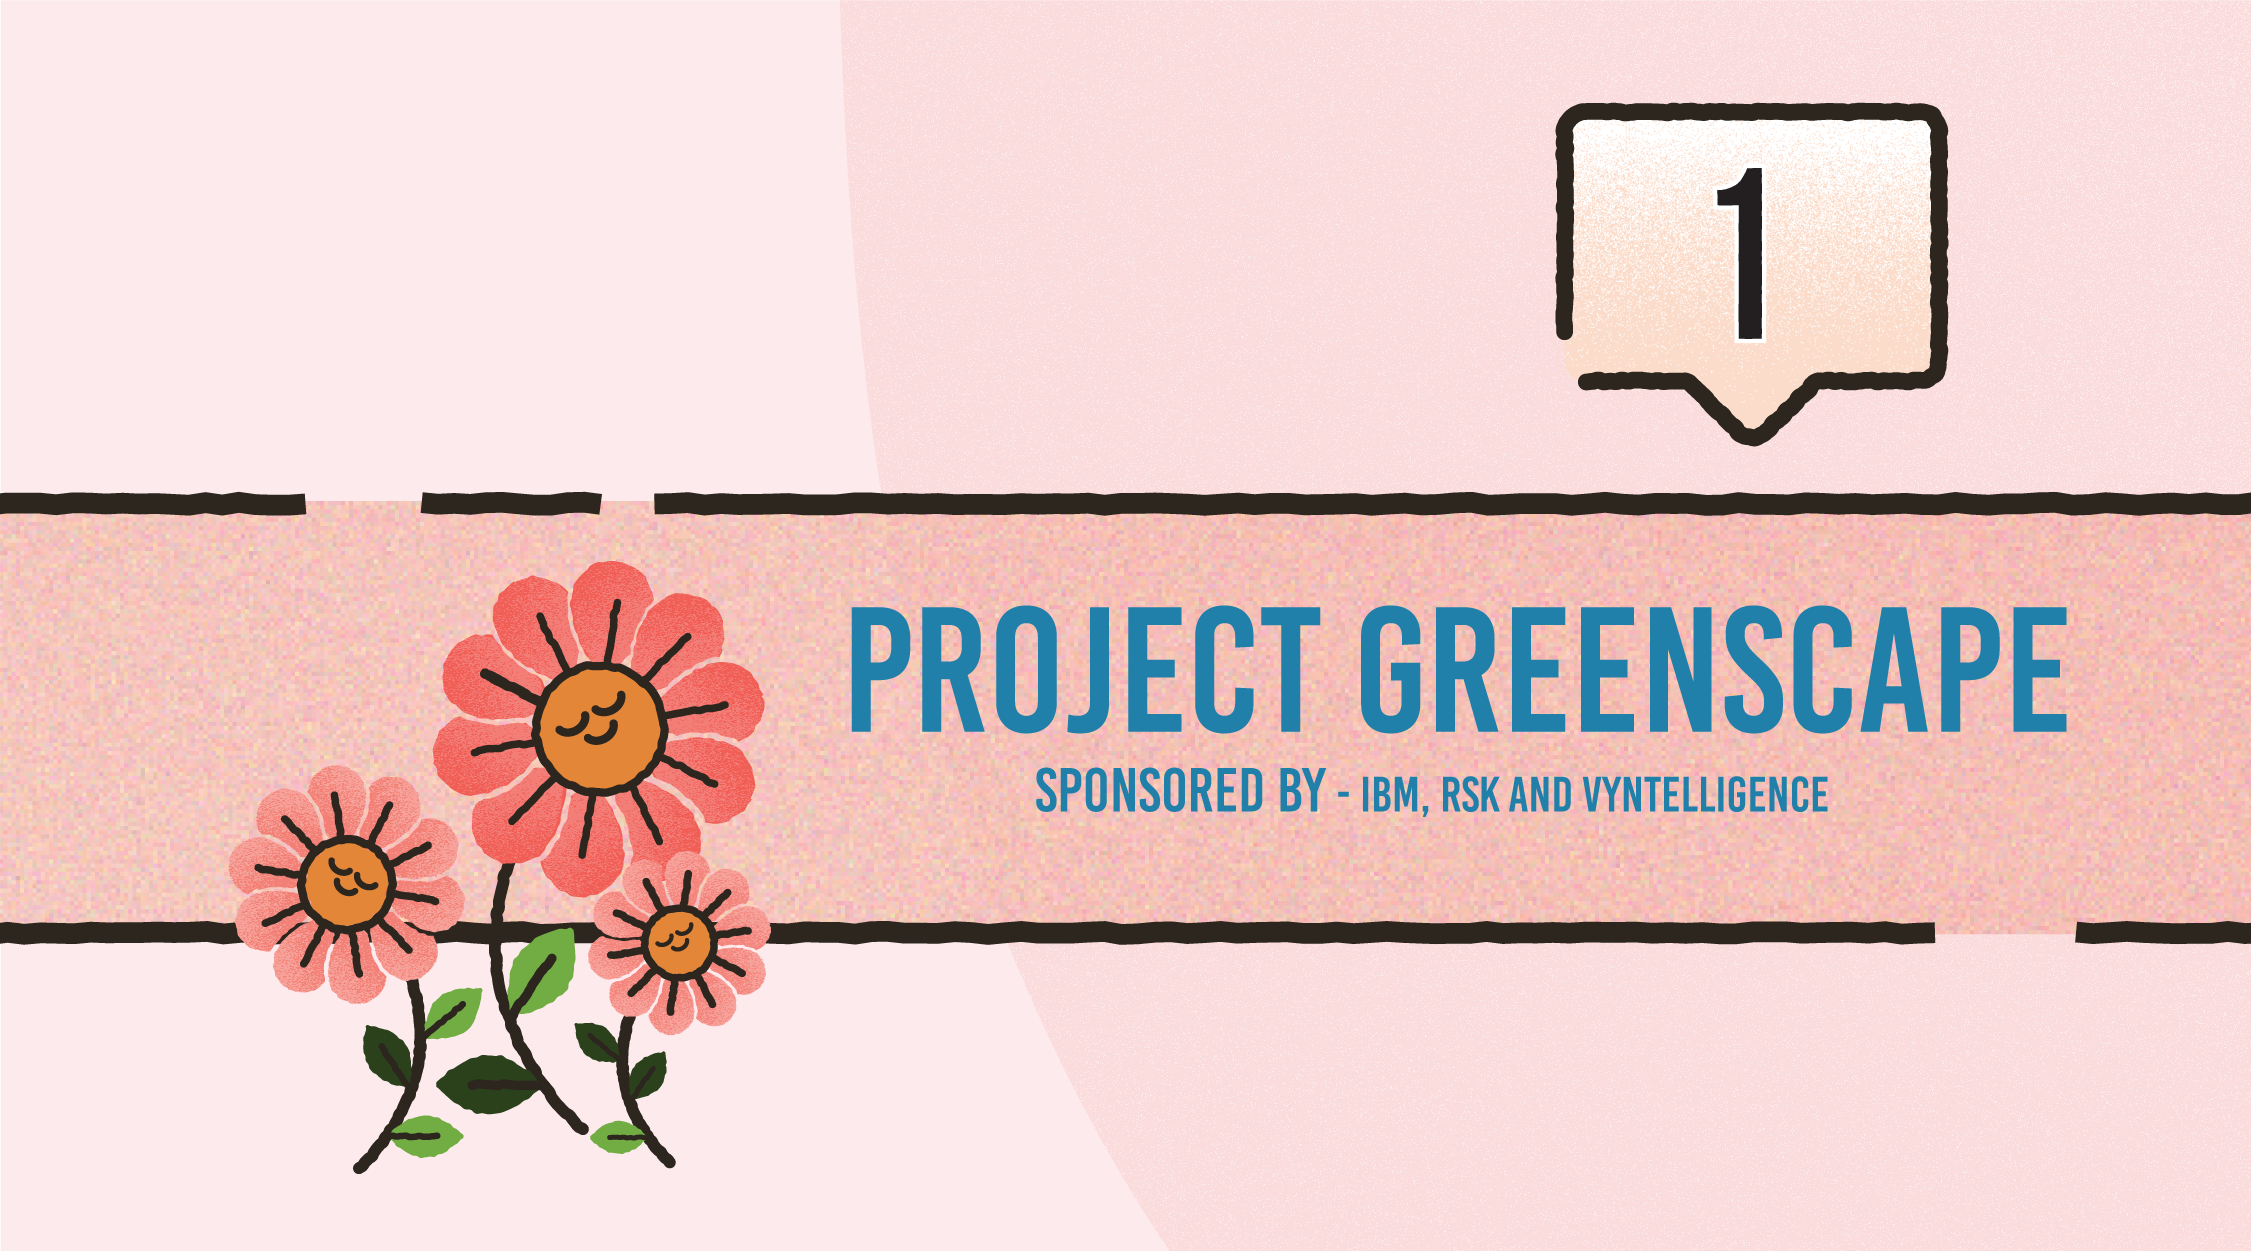 Project Greenscape